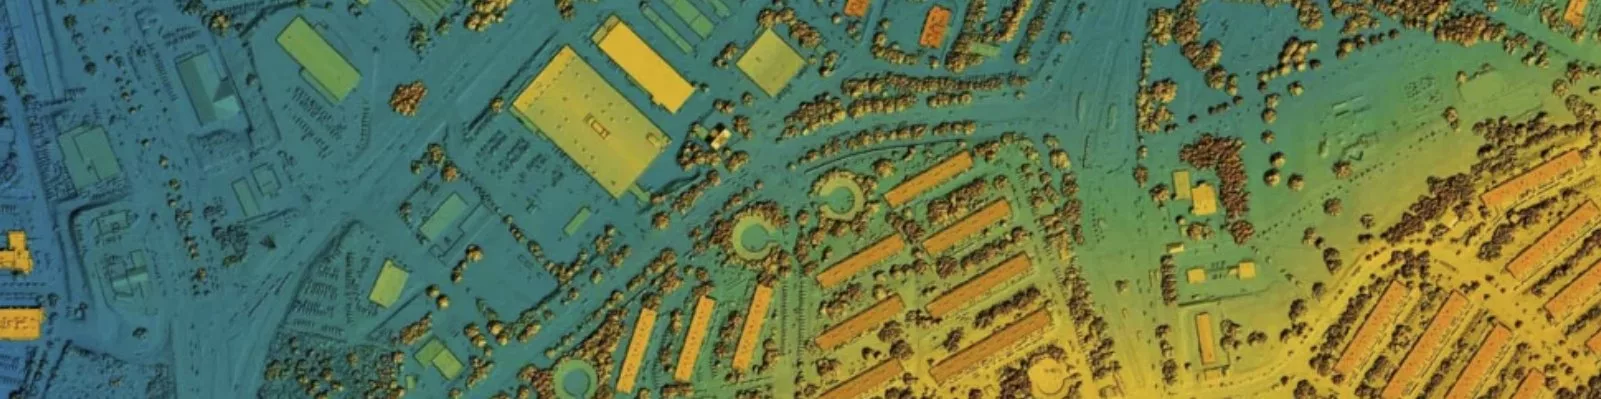 Example of LiDAR pointcloud from above